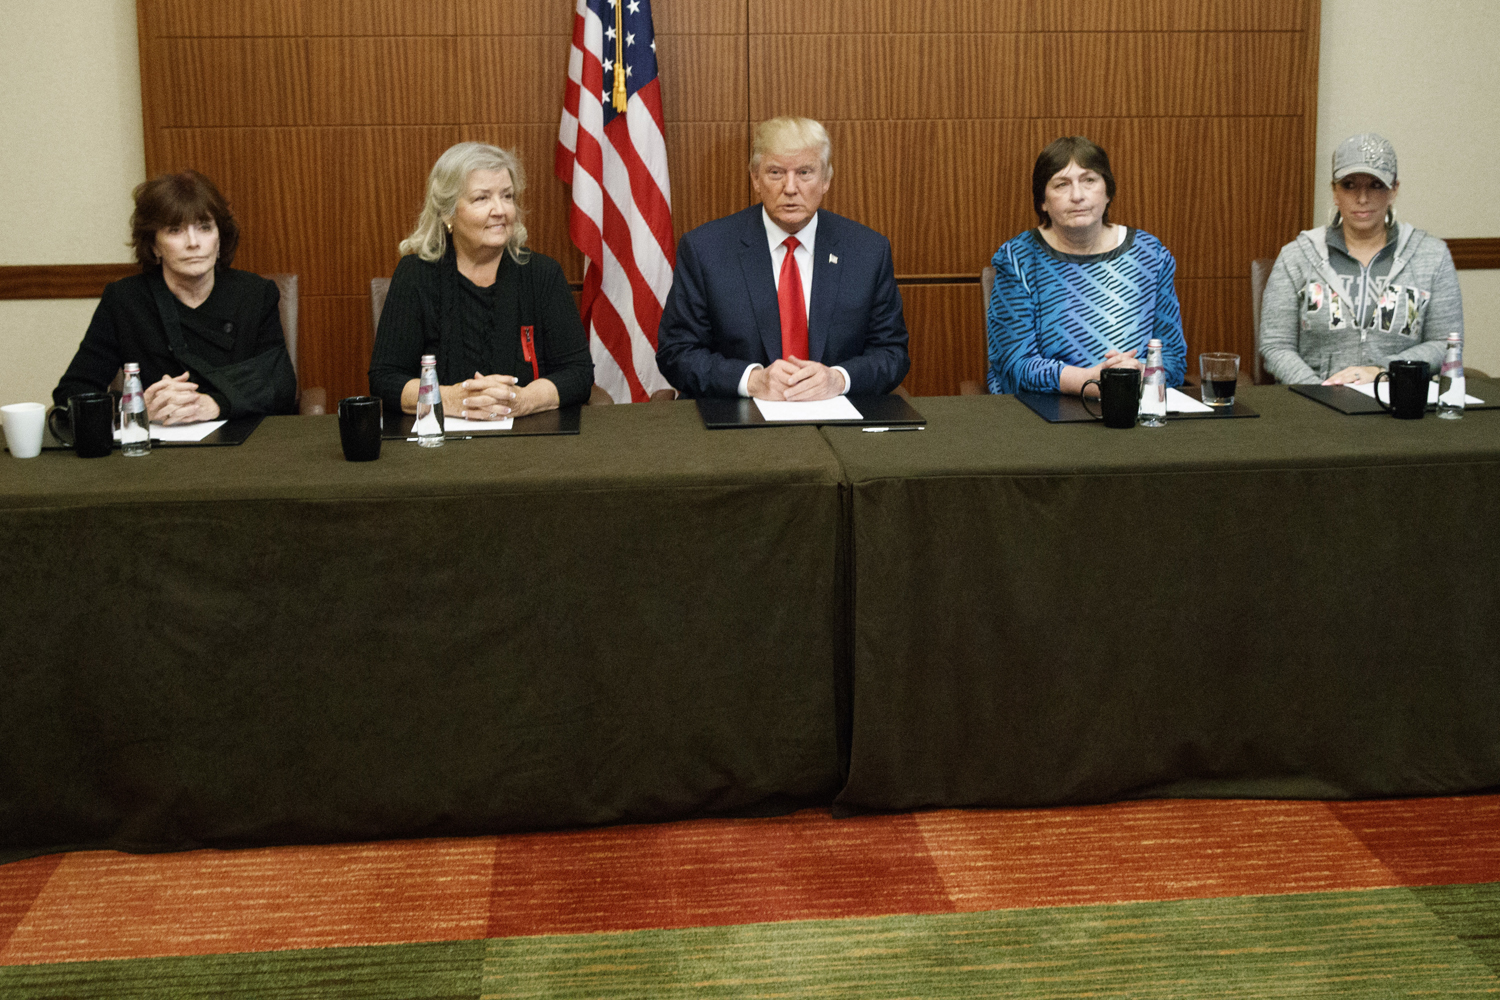 Republican presidential candidate Donald Trump, center, sits with, from right, Paula Jones, Kathy Shelton, Juanita Broaddrick, and Kathleen Willey, before the second presidential debate with democratic presidential candidate Hillary Clinton at Washington University. (Evan Vucci/AP)